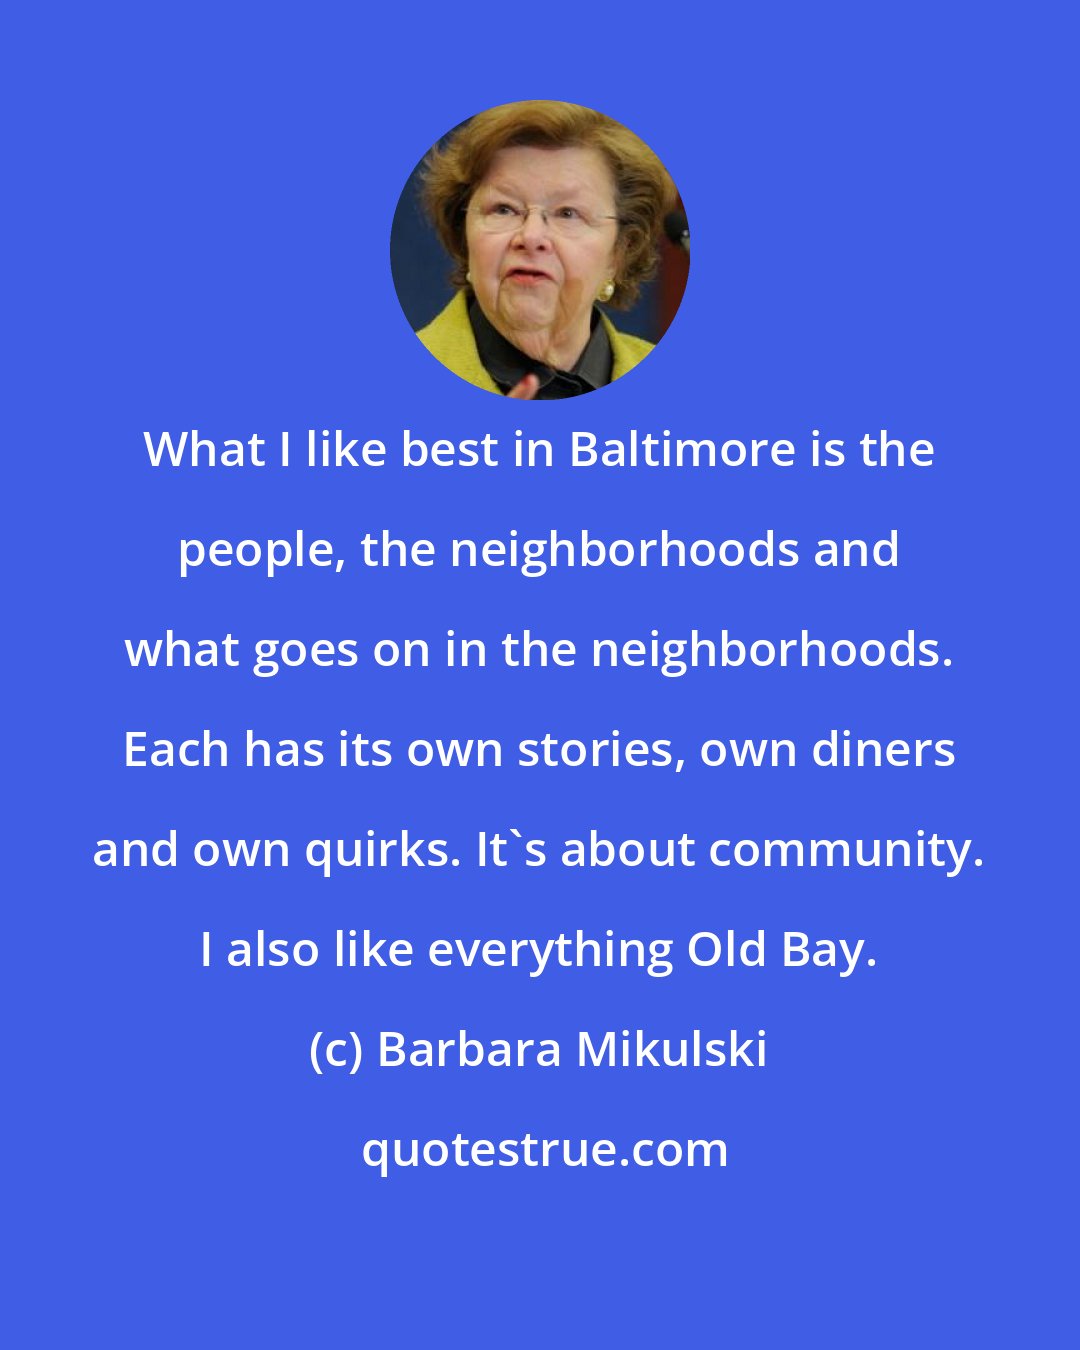 Barbara Mikulski: What I like best in Baltimore is the people, the neighborhoods and what goes on in the neighborhoods. Each has its own stories, own diners and own quirks. It's about community. I also like everything Old Bay.